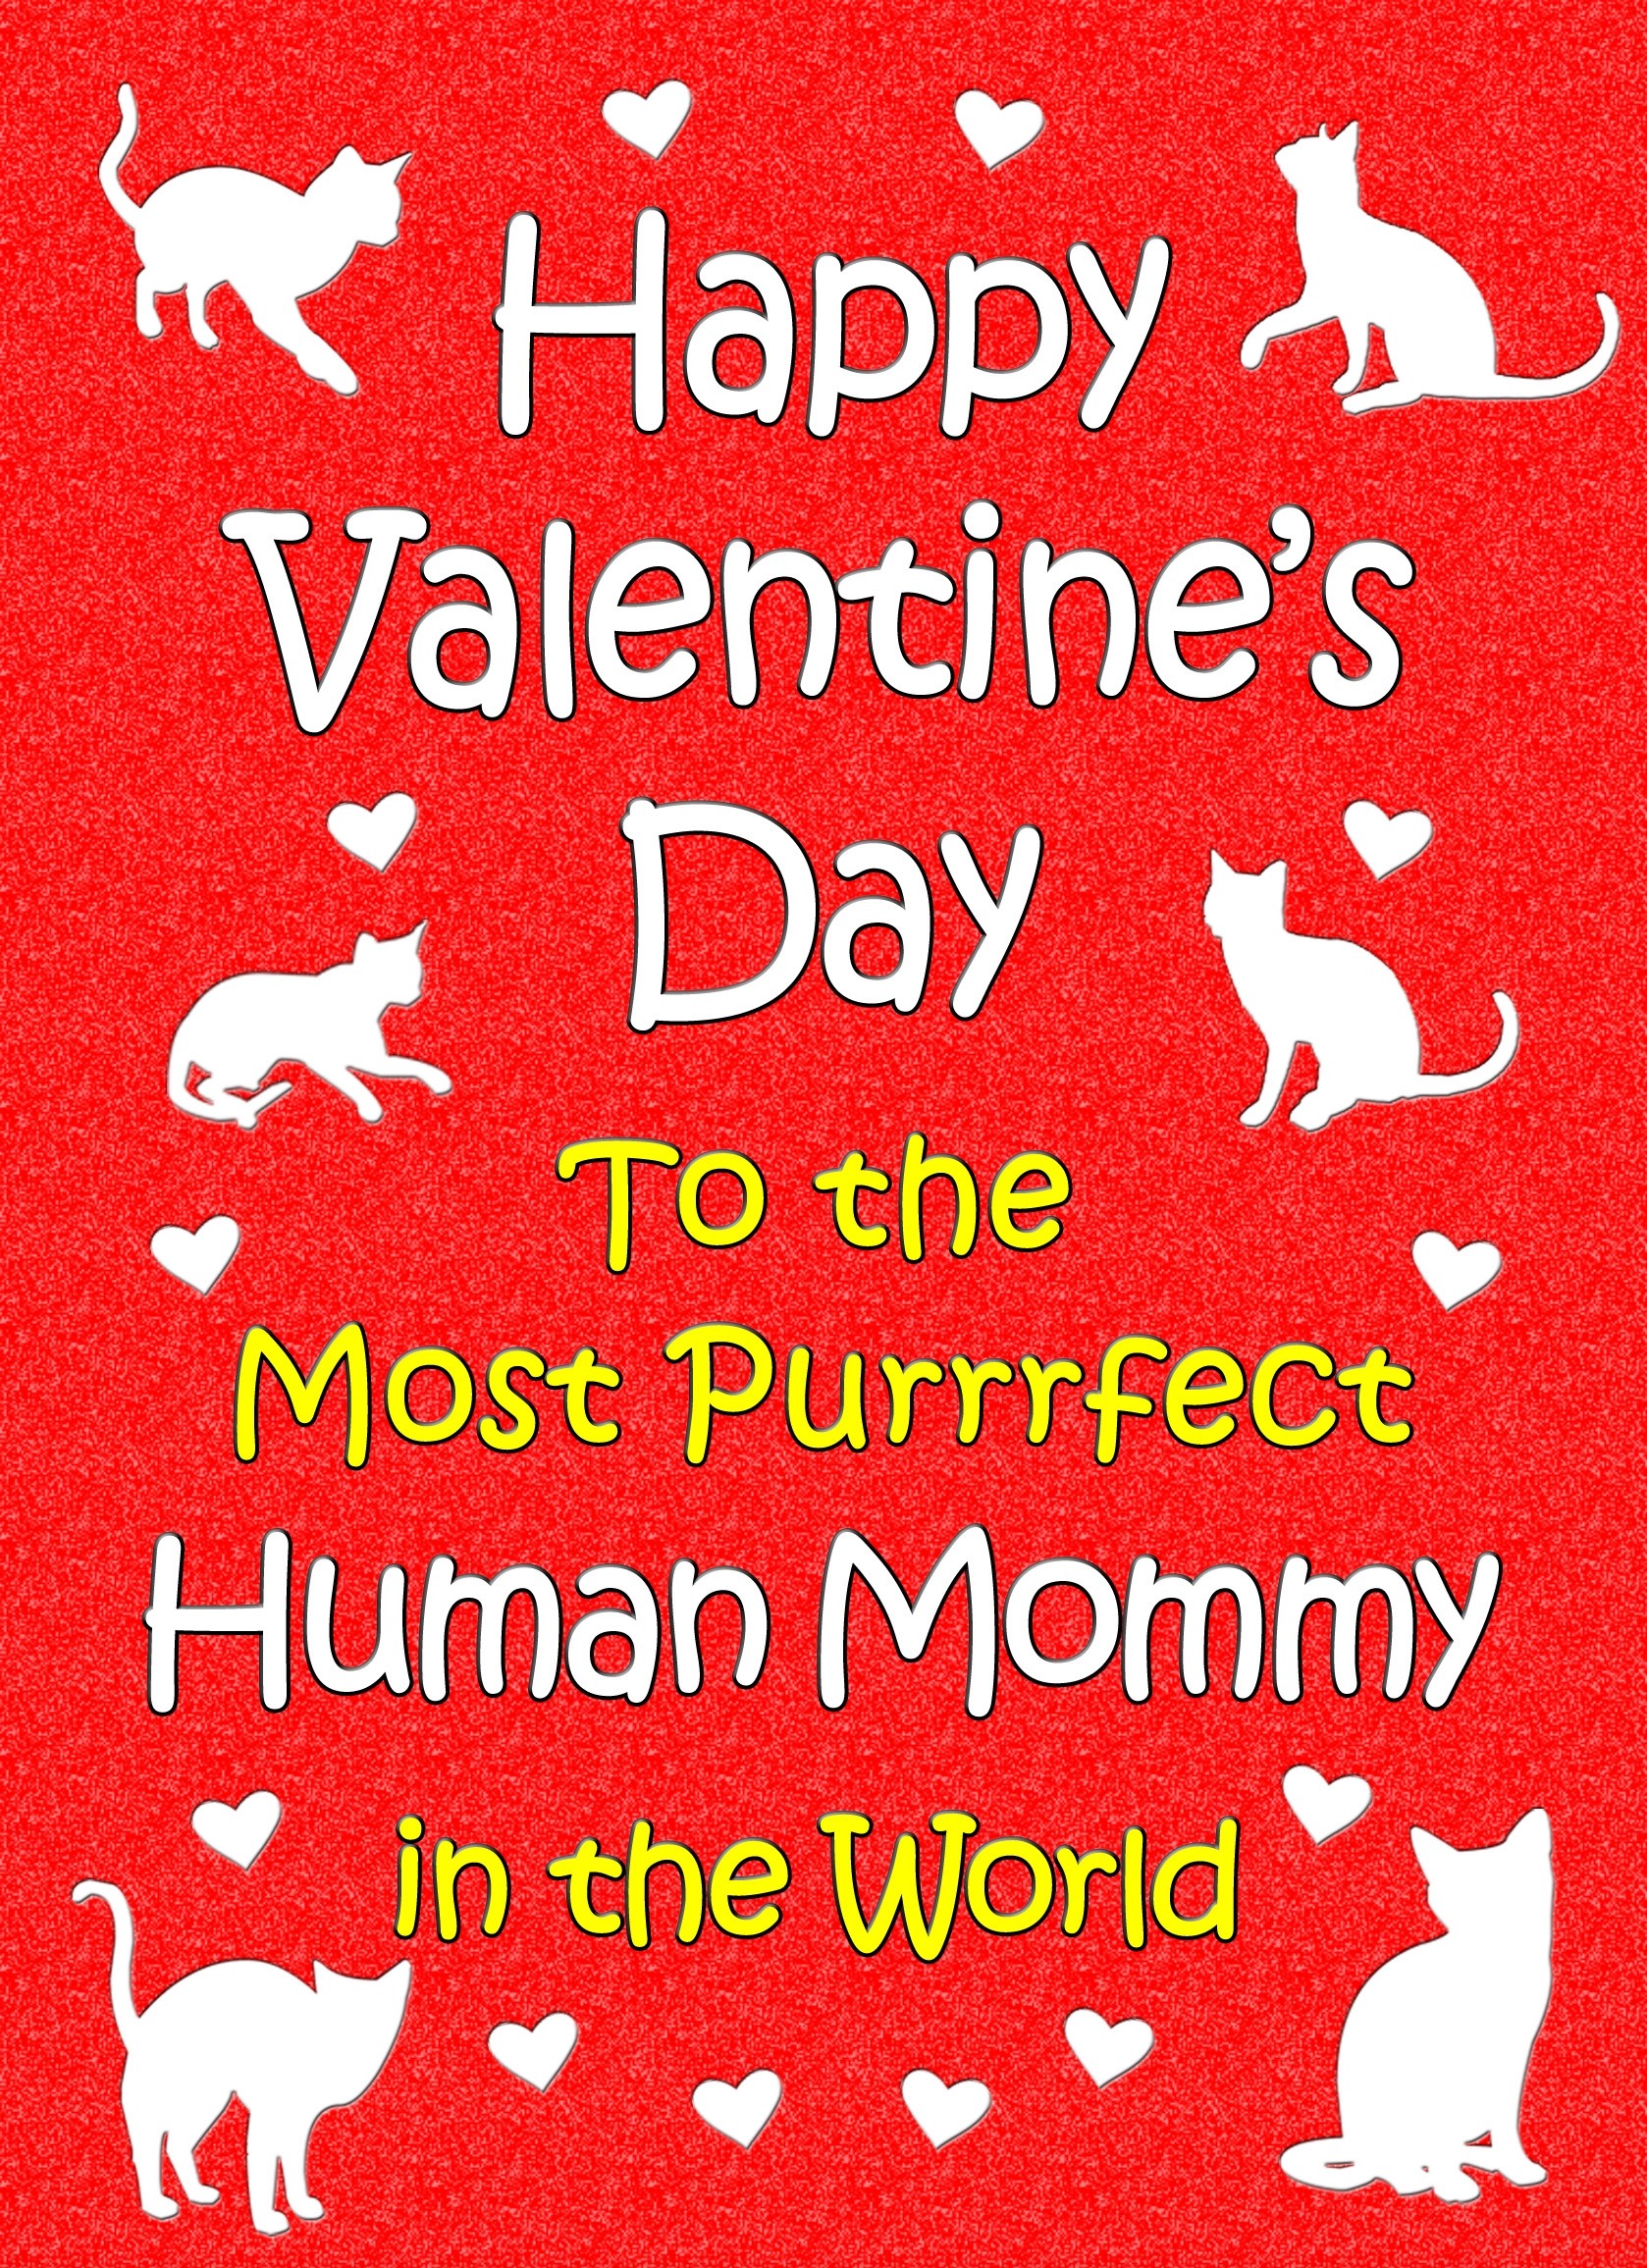 From The Cat Valentines Day Card (Human Mommy)